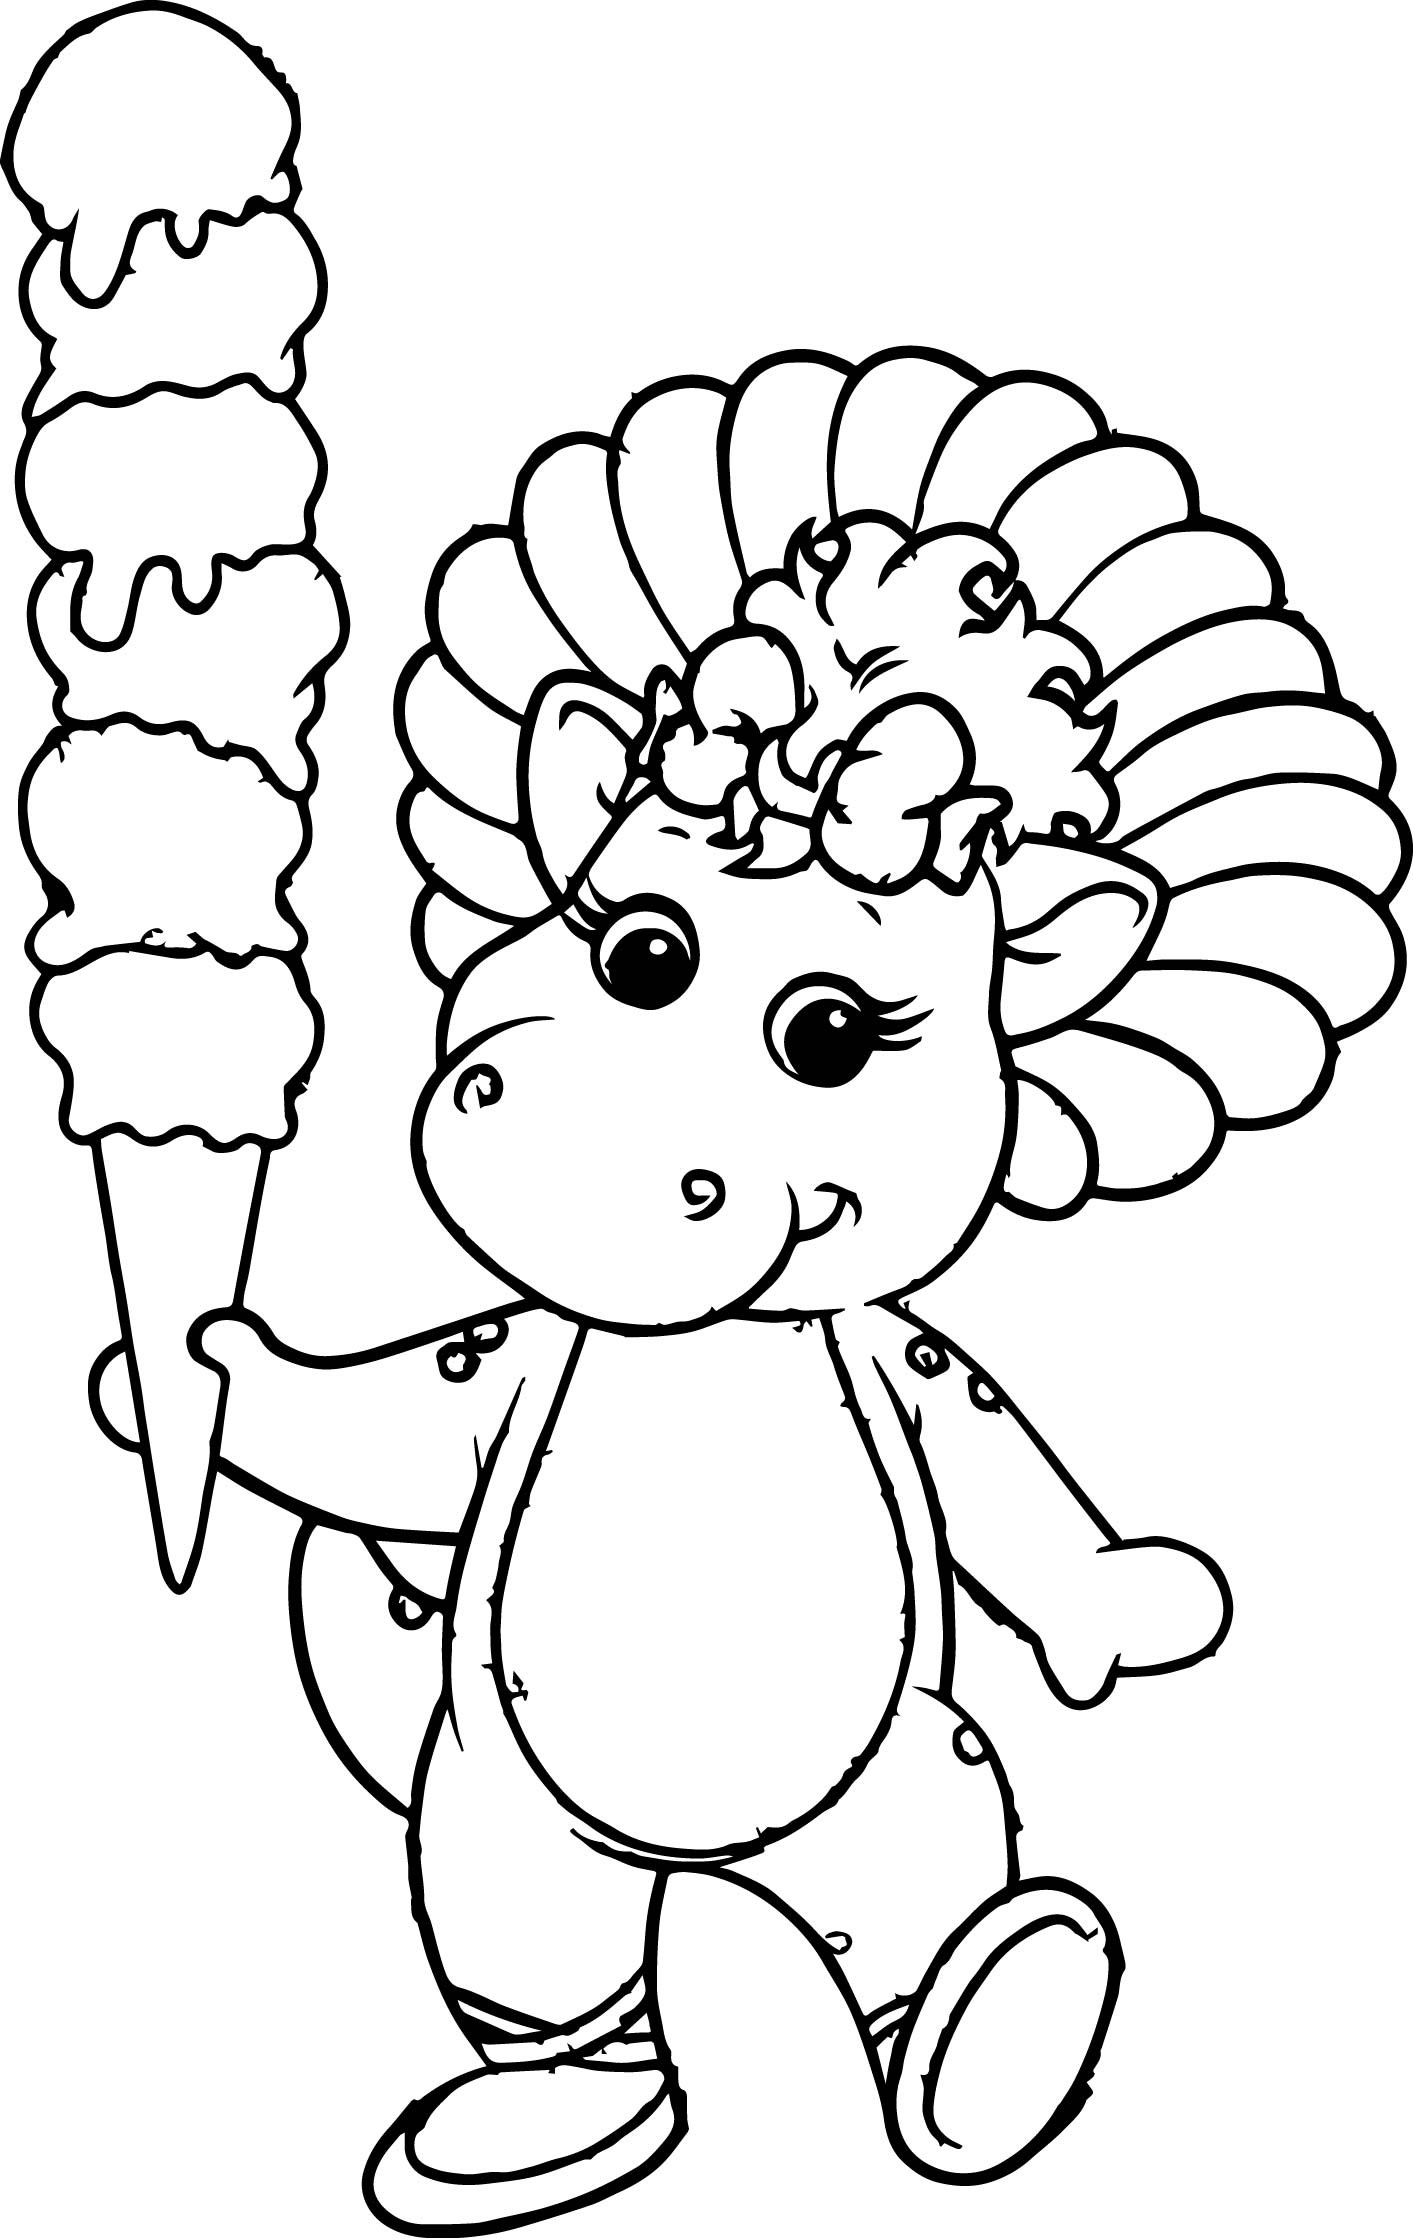 Baby Bop Coloring Pages - Coloring Home